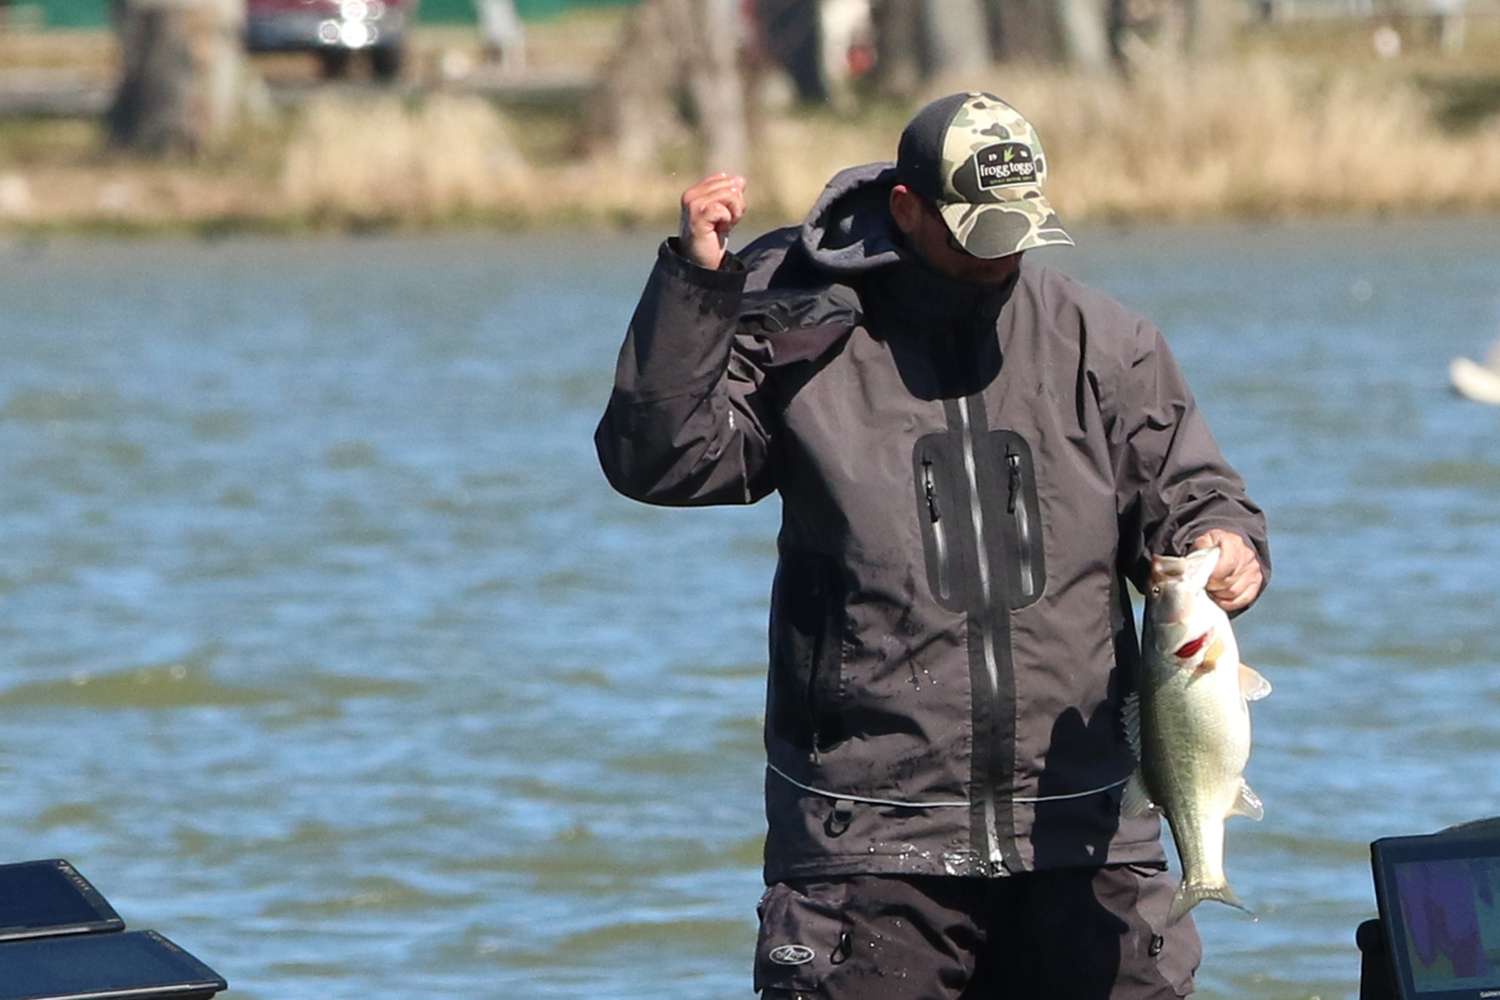 Follow David Mullins around Lake Guntersville during the second day of the 2020 Academy Sports + Outdoors Bassmaster Classic presented by Huk.